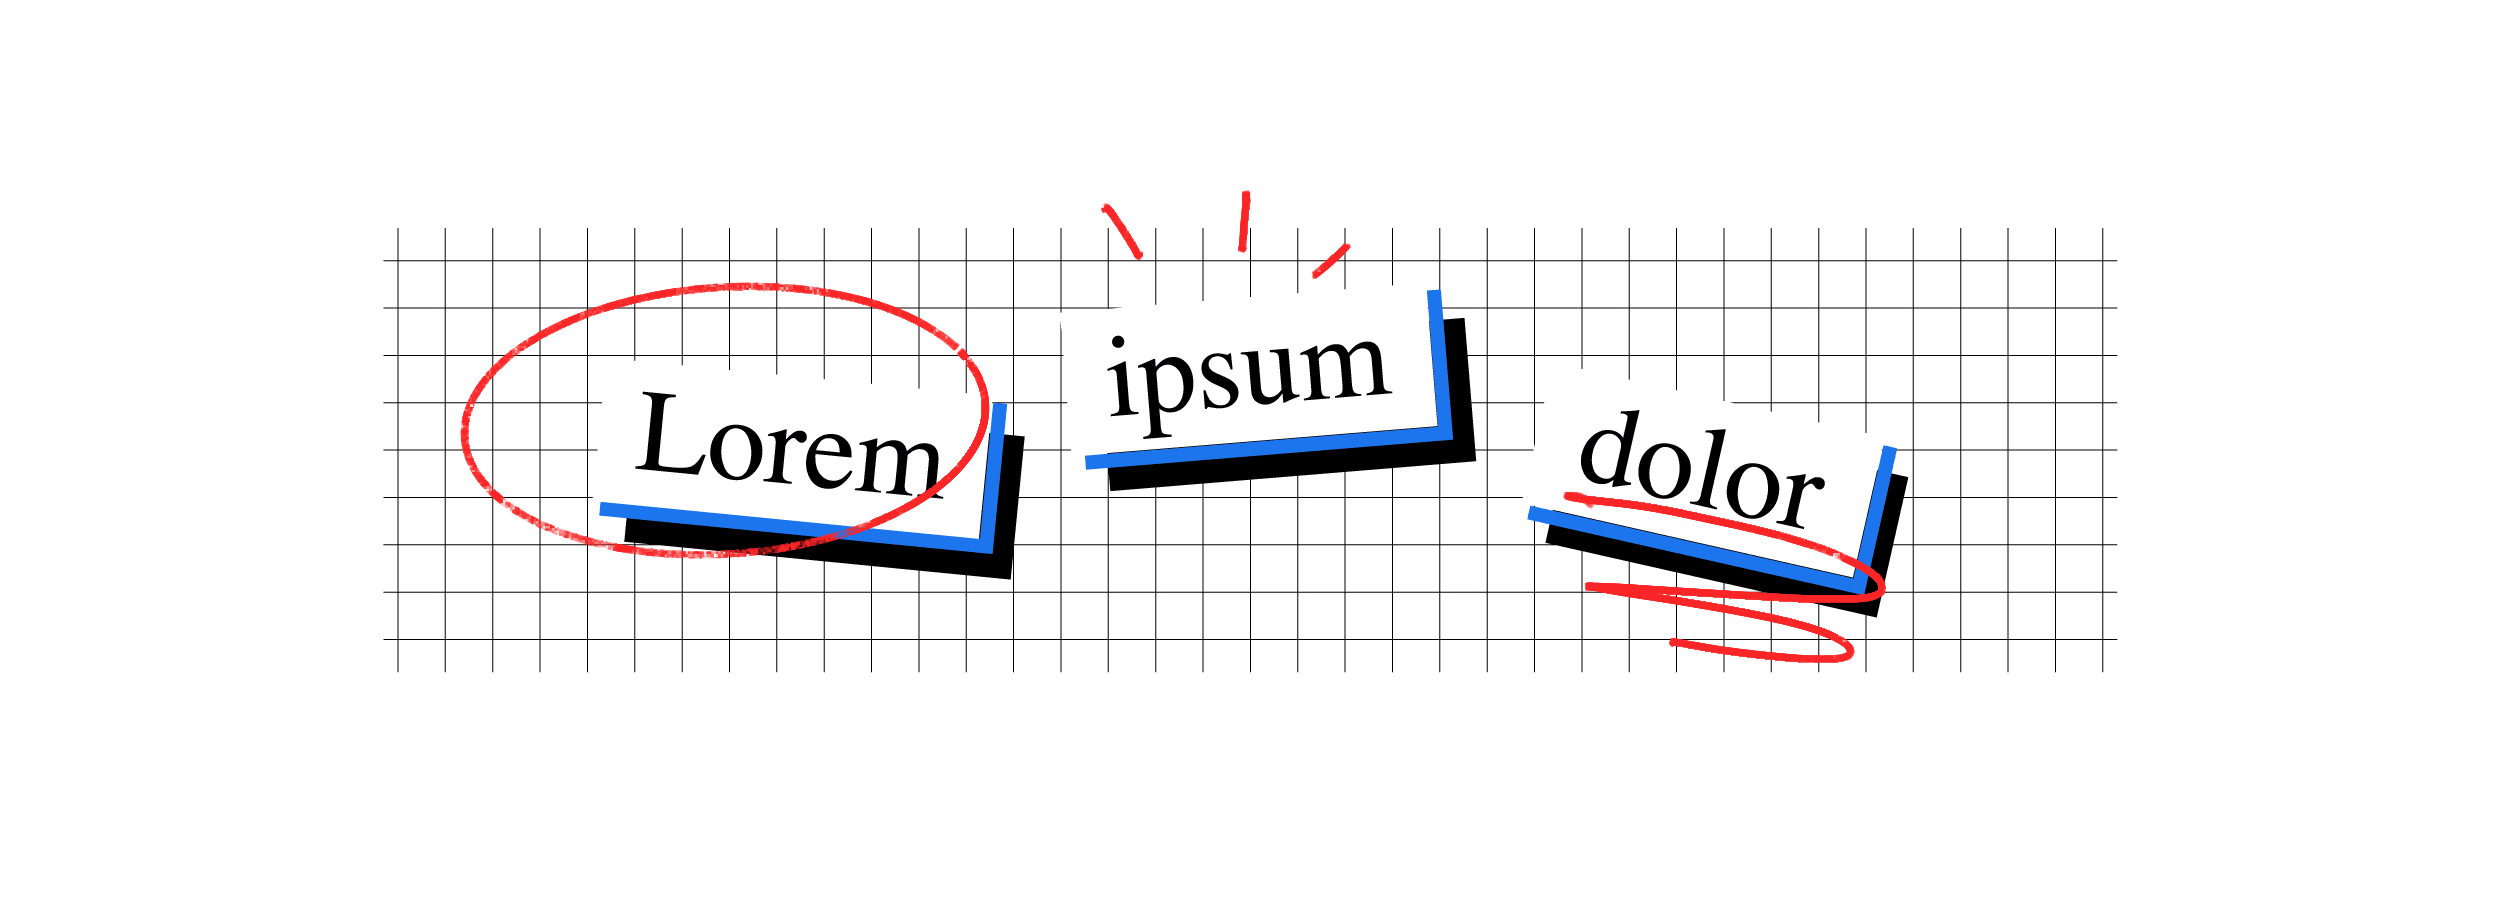 Lorem Ipsum placeholder text used in editing and graphic design